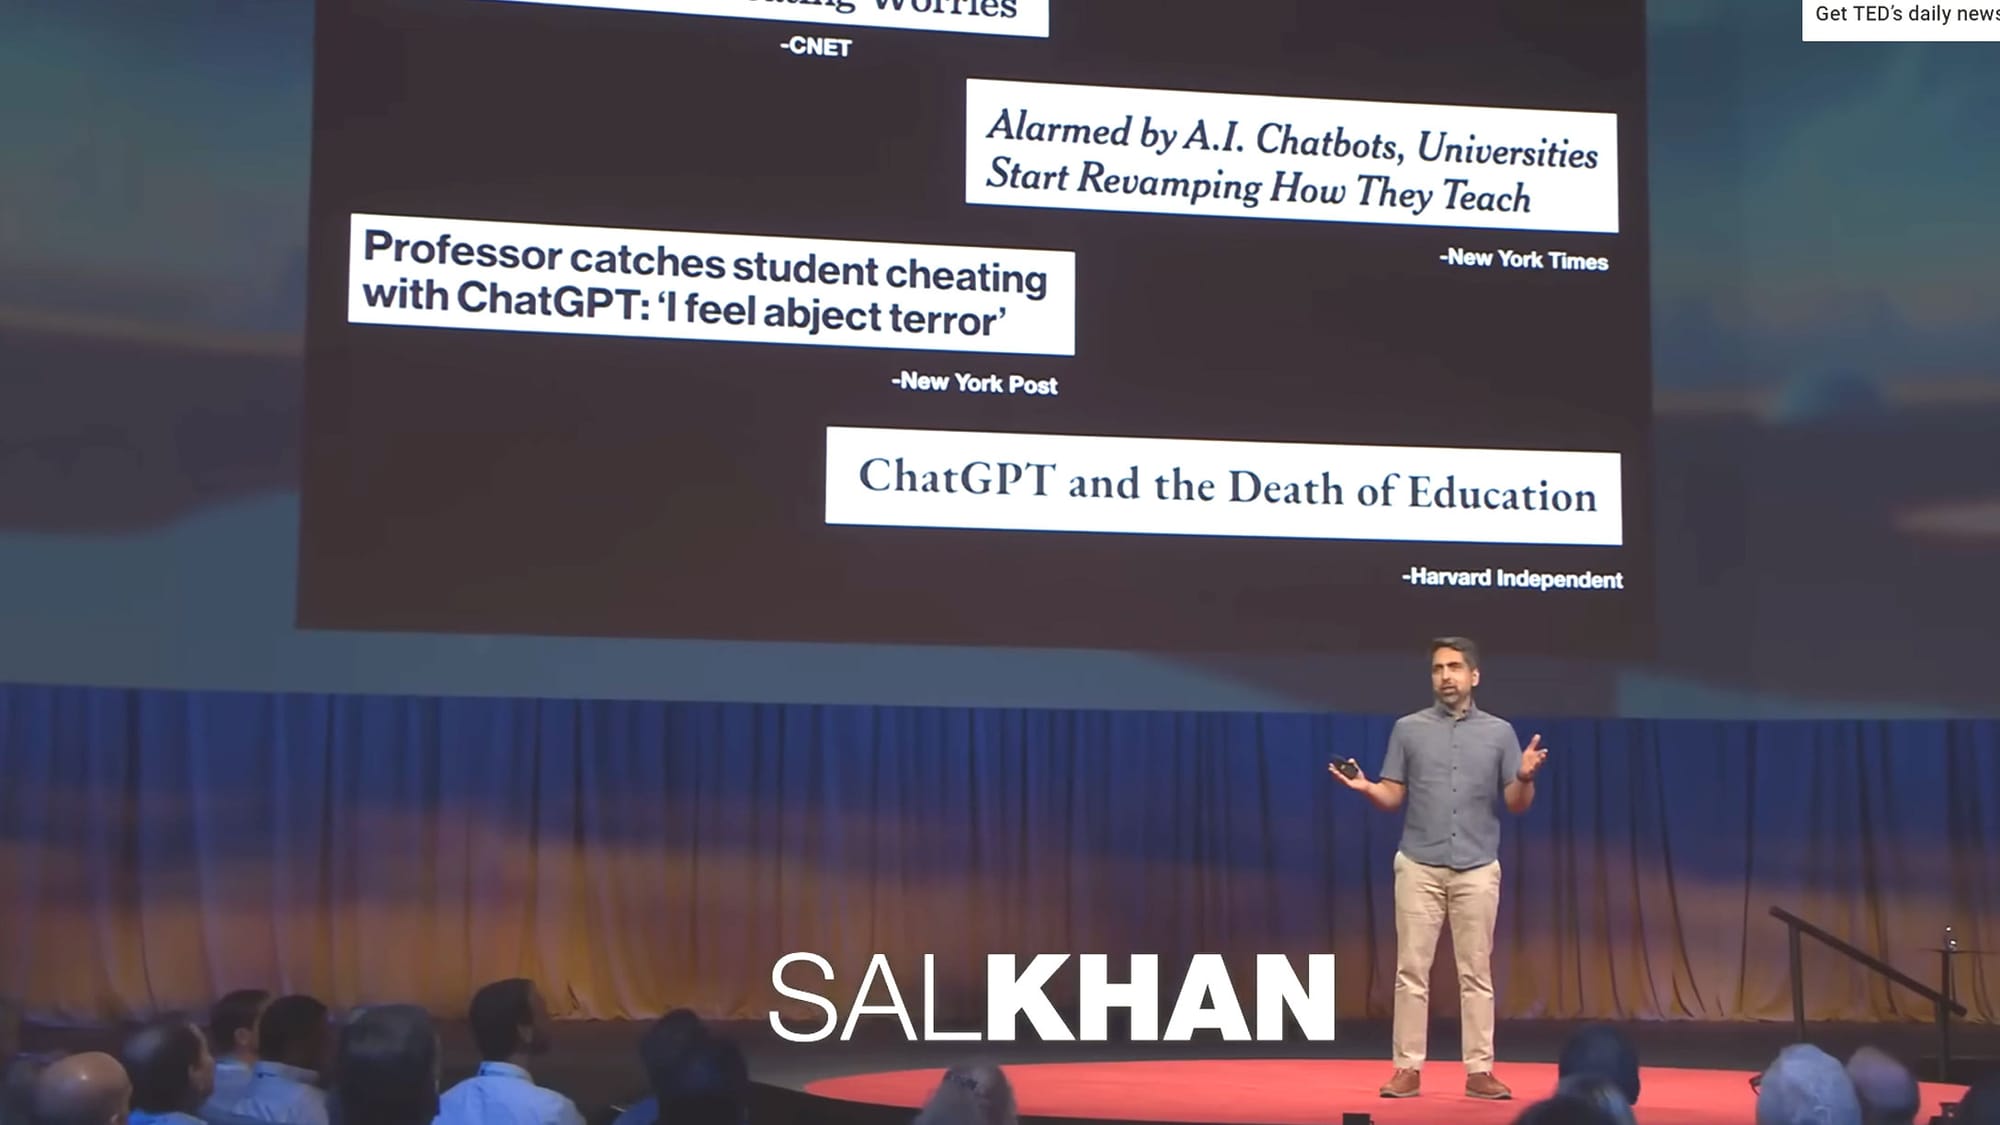 Screenshot of Sal Khan's TED talk from Spring 2023 introducing his new AI tutoring program, Khanmigo: a screen above him quotes news stories expressing skepticism about ChatGPT and the threat posed by AI to education, including, "Alarmed by A.I. Chatbotx, Universities Start Revamping How They Teach," "Professor catches student cheating with Chat GPT: 'I feel abject terror,'" and "ChatGPT and the Death of Education"